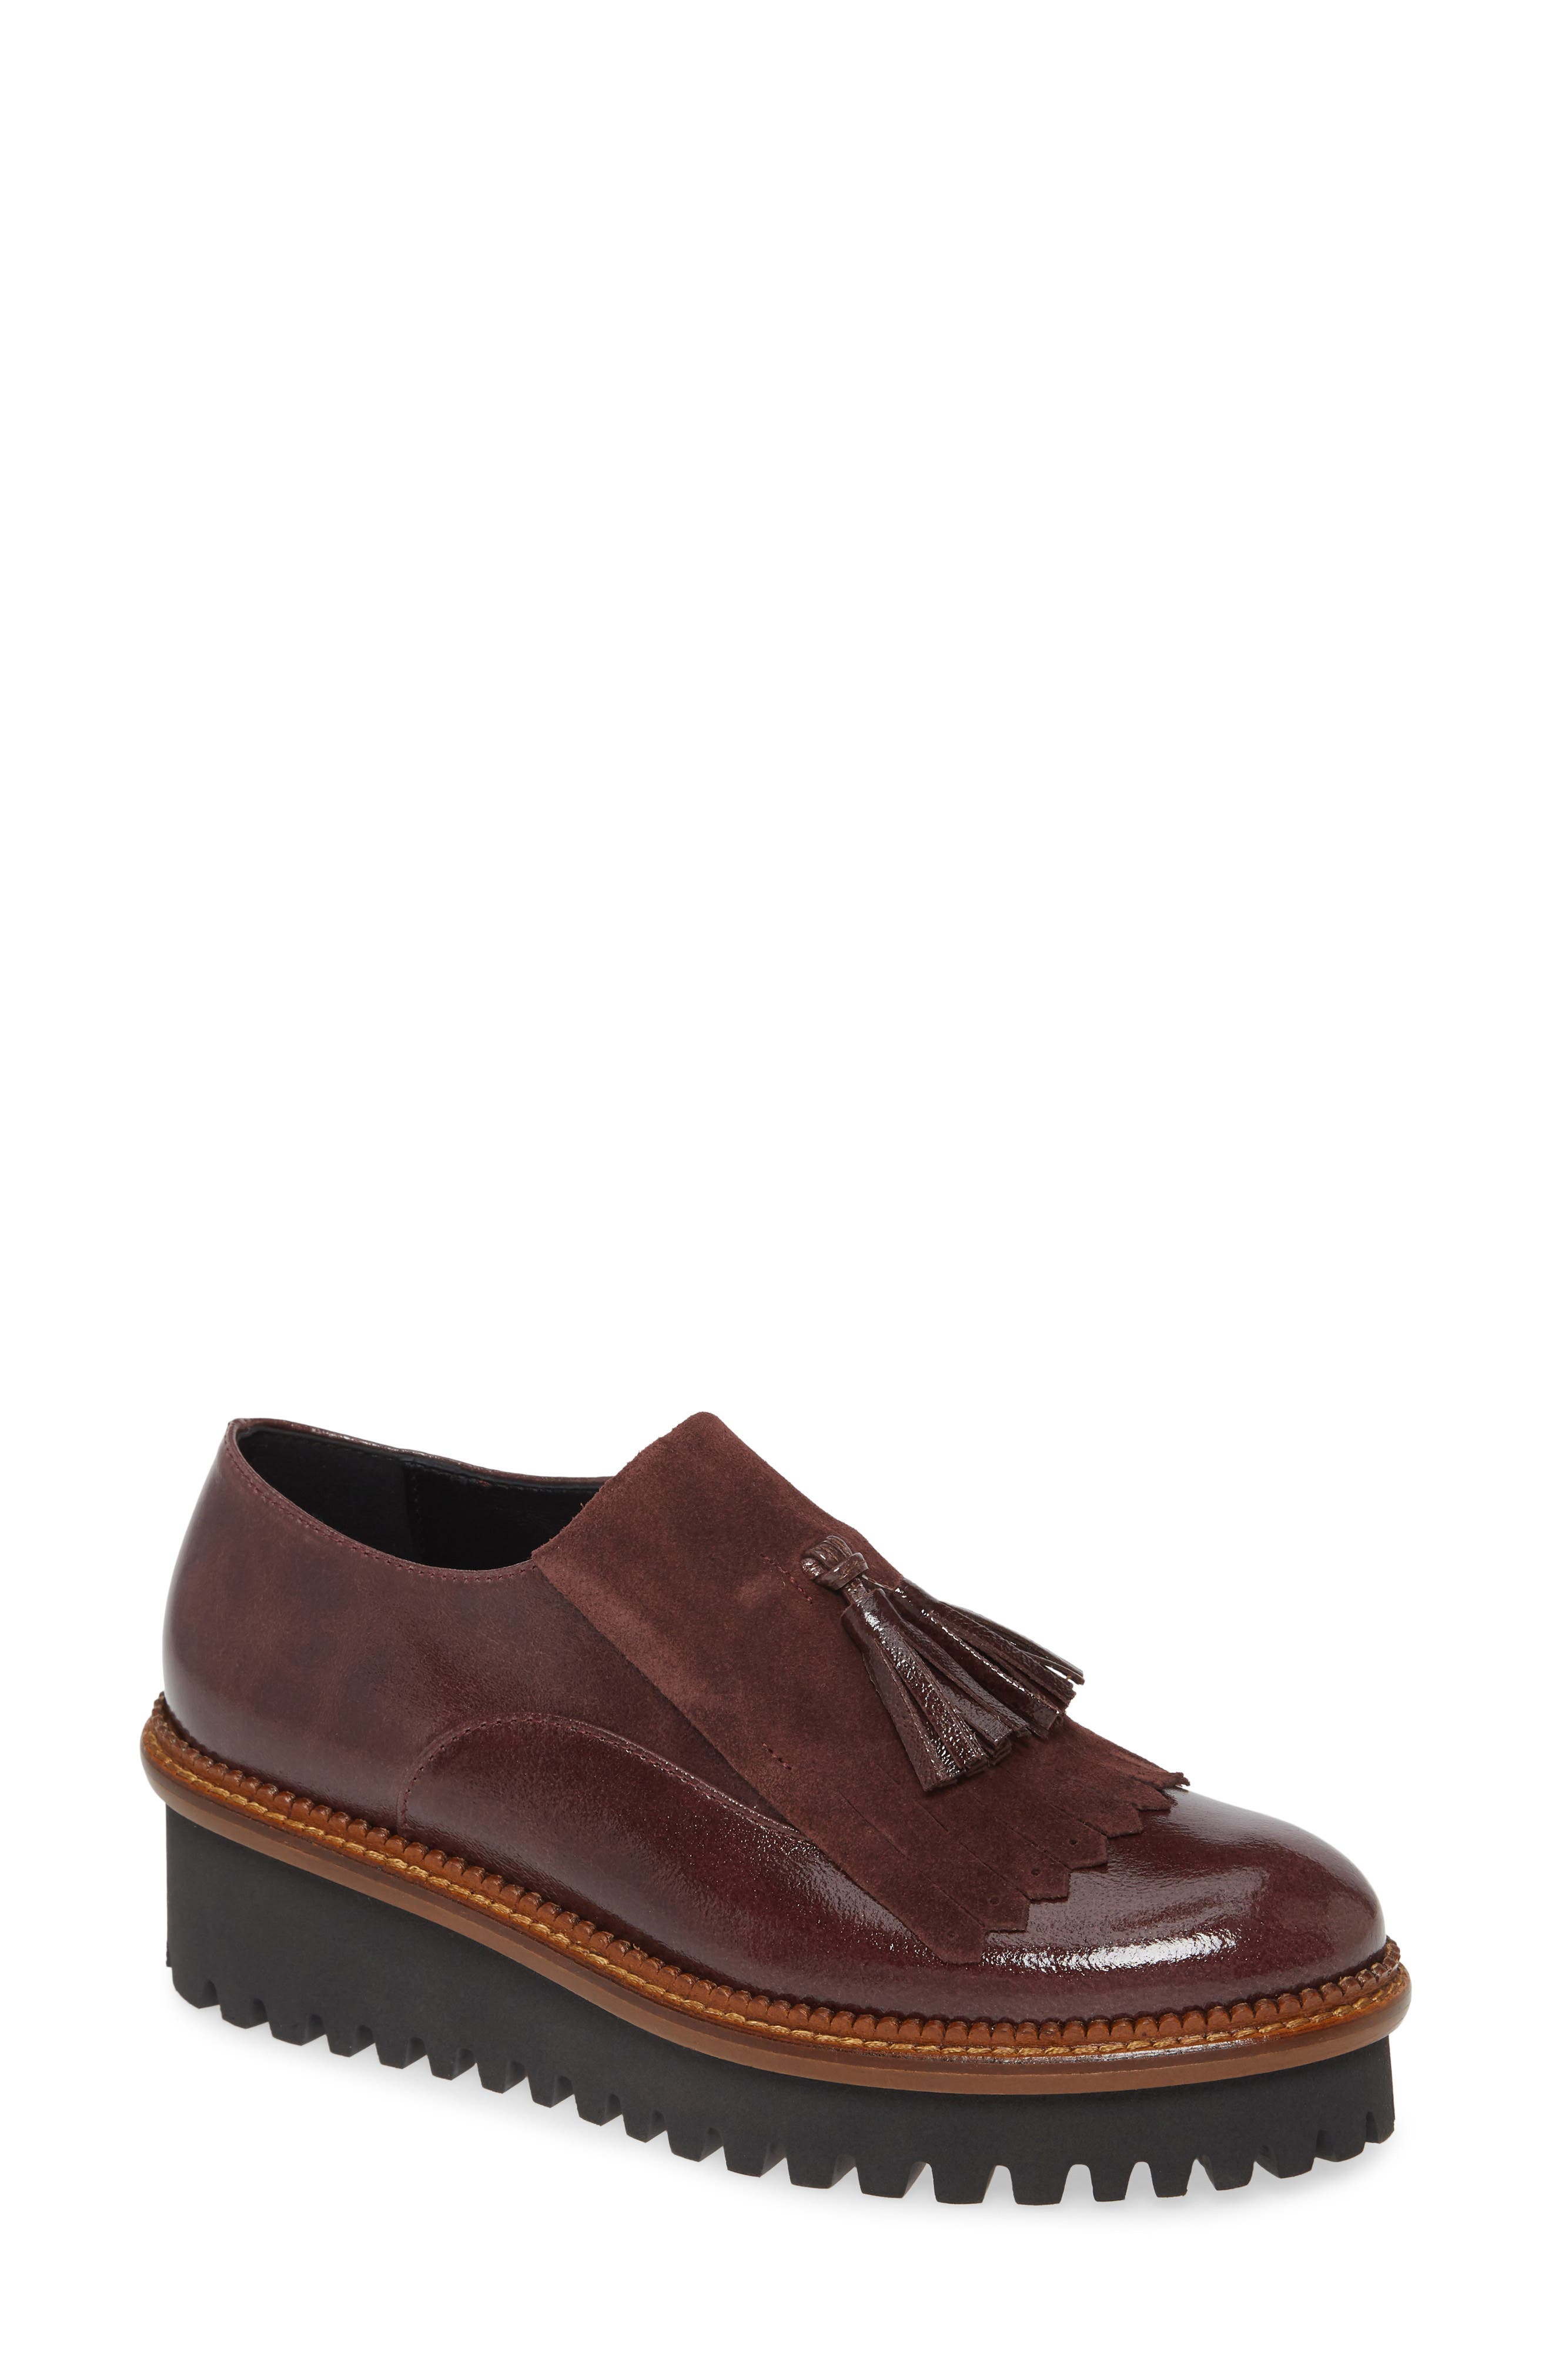 Cordani Allyne Wedge Loafer in Burgundy Patent Leather